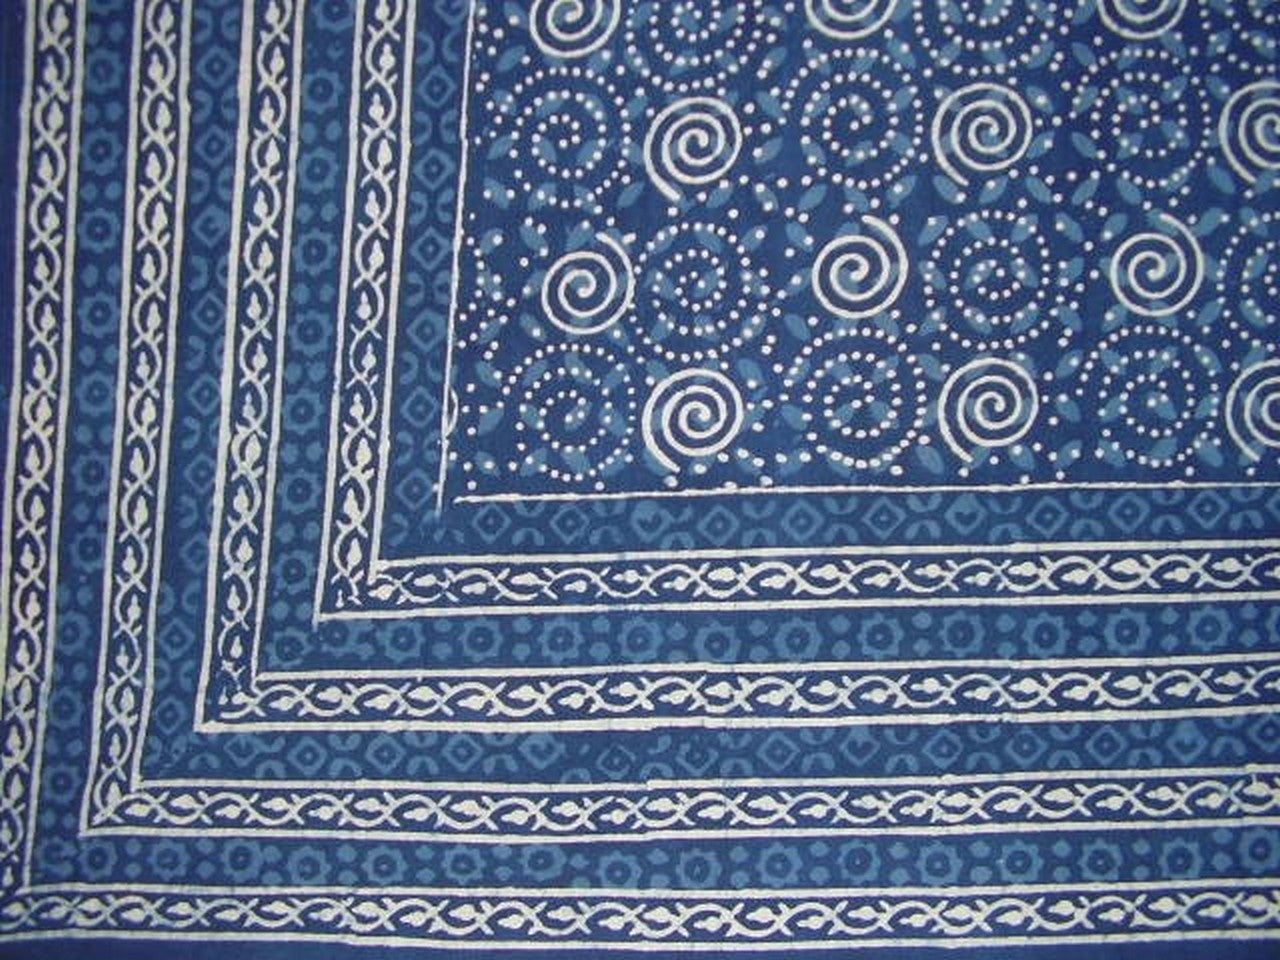 Dabu Indian Tapestry Cotton Spread 106 "x 72" Twin Blue